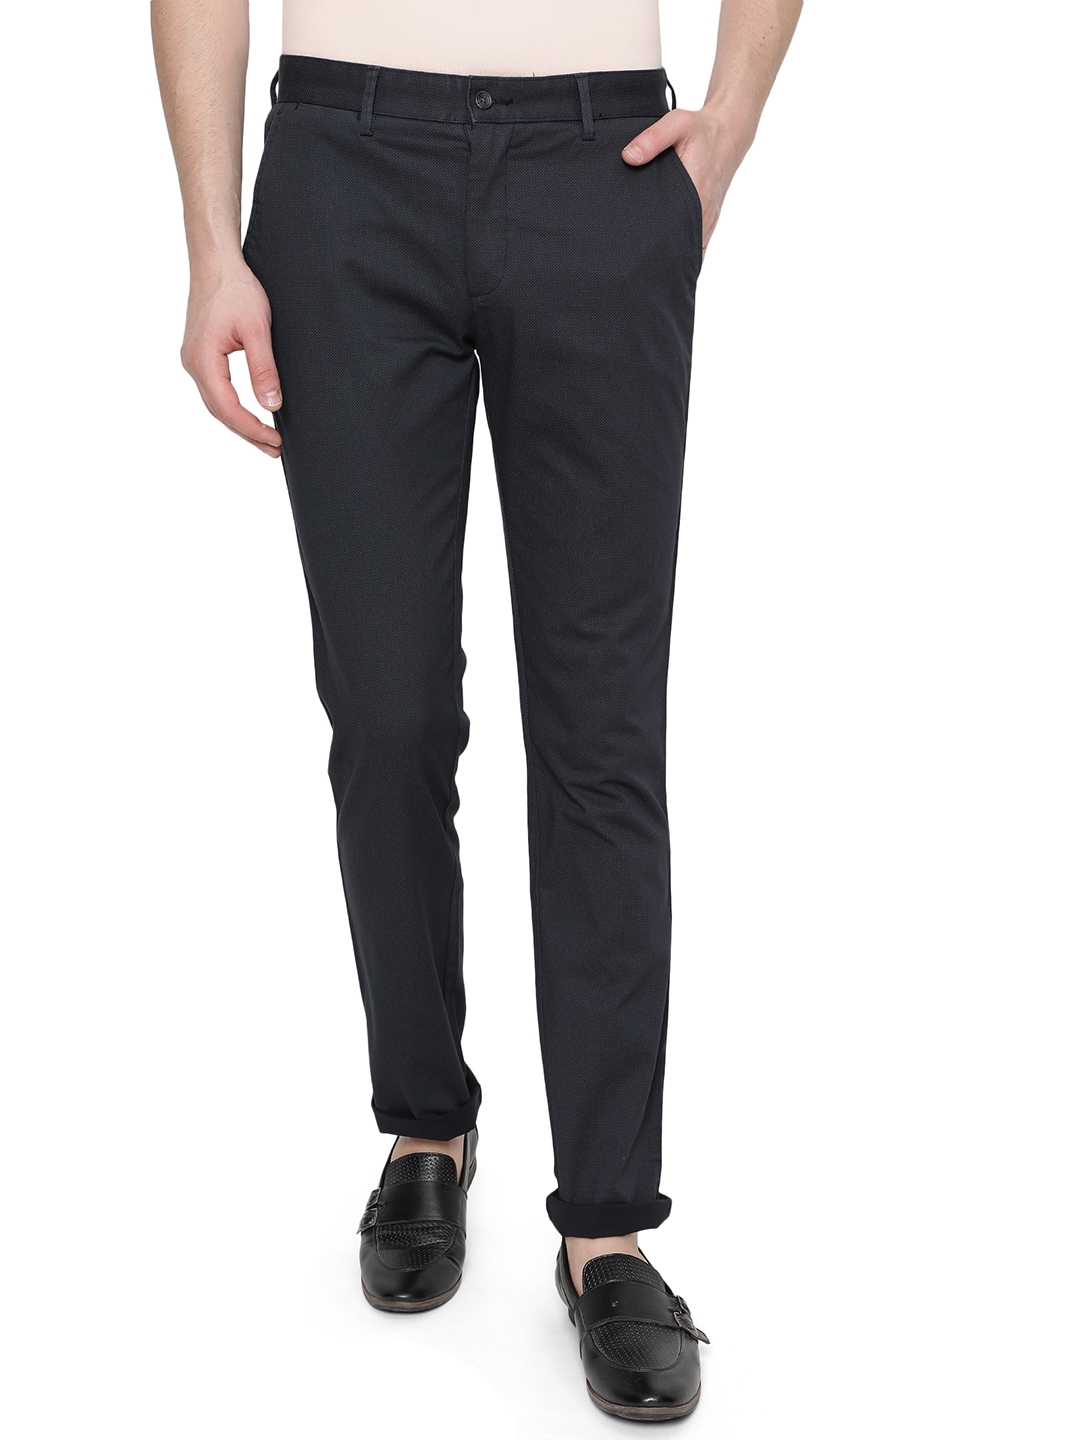 Greenfibre | Navy Blue Solid Super Slim Fit Casual Trouser | Greenfibre